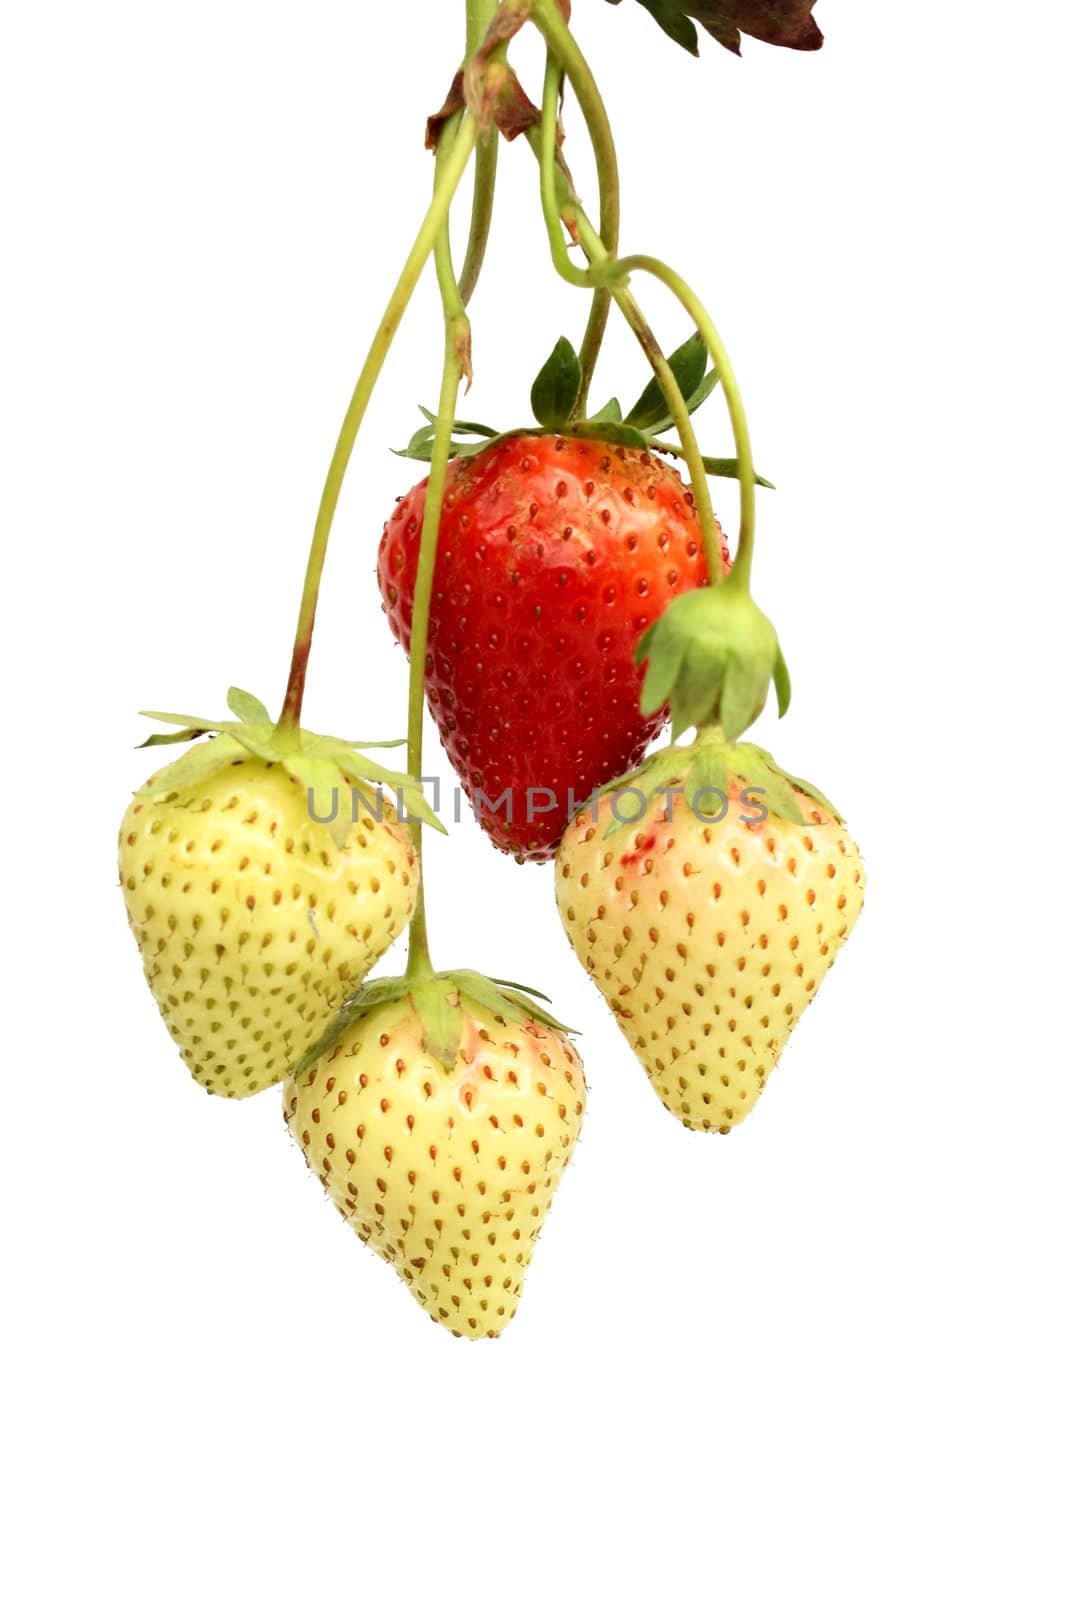 Red and green strawberries, isolated on white background